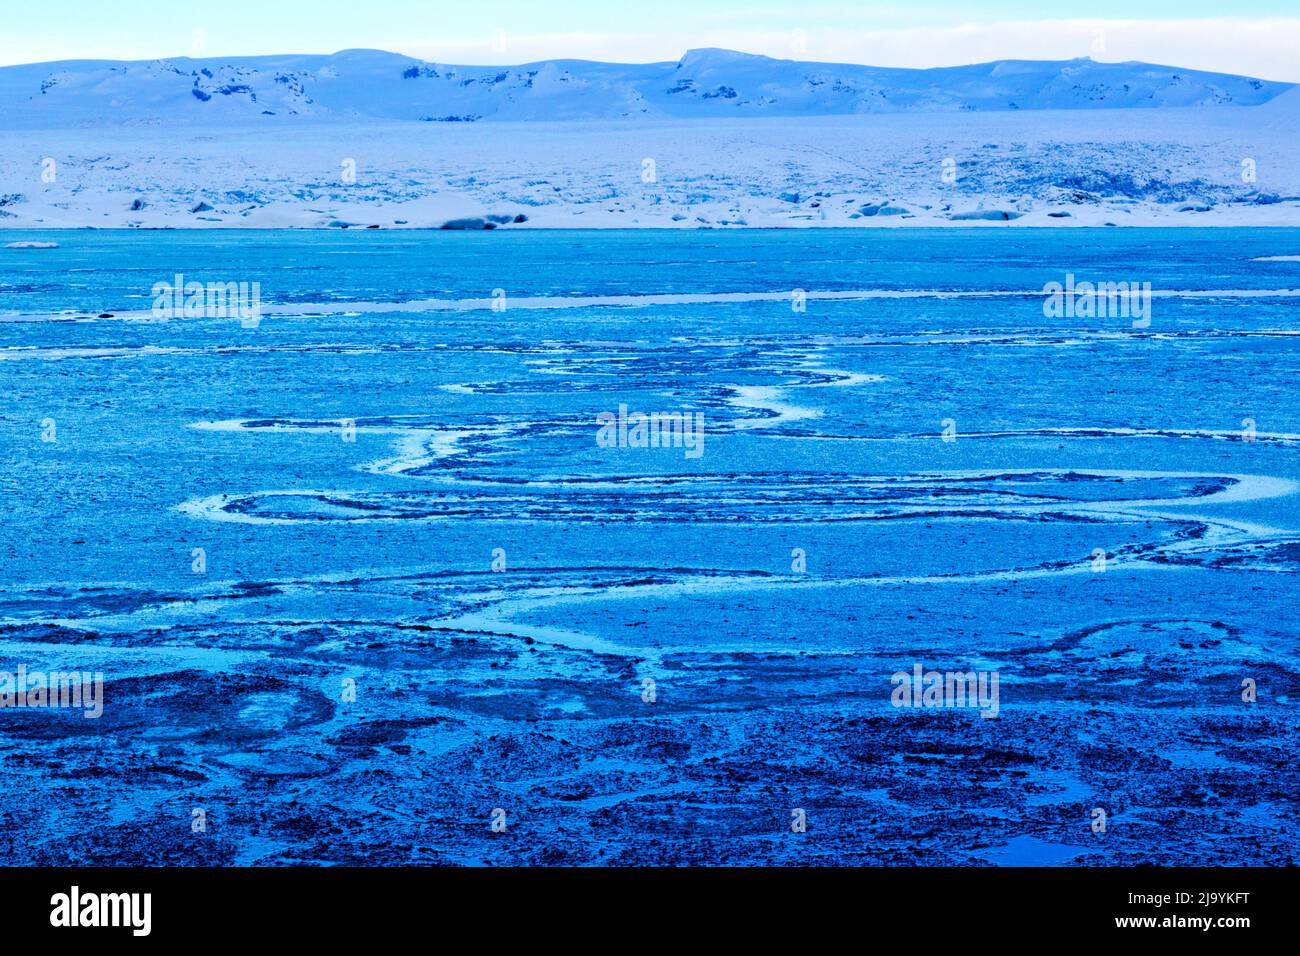 A winter 'blue hour' morning view across the Jökulsarlön iceberg lagoon with no icebergs present. The lagoon is covered by a broken layer of thin ice. Stock Photo